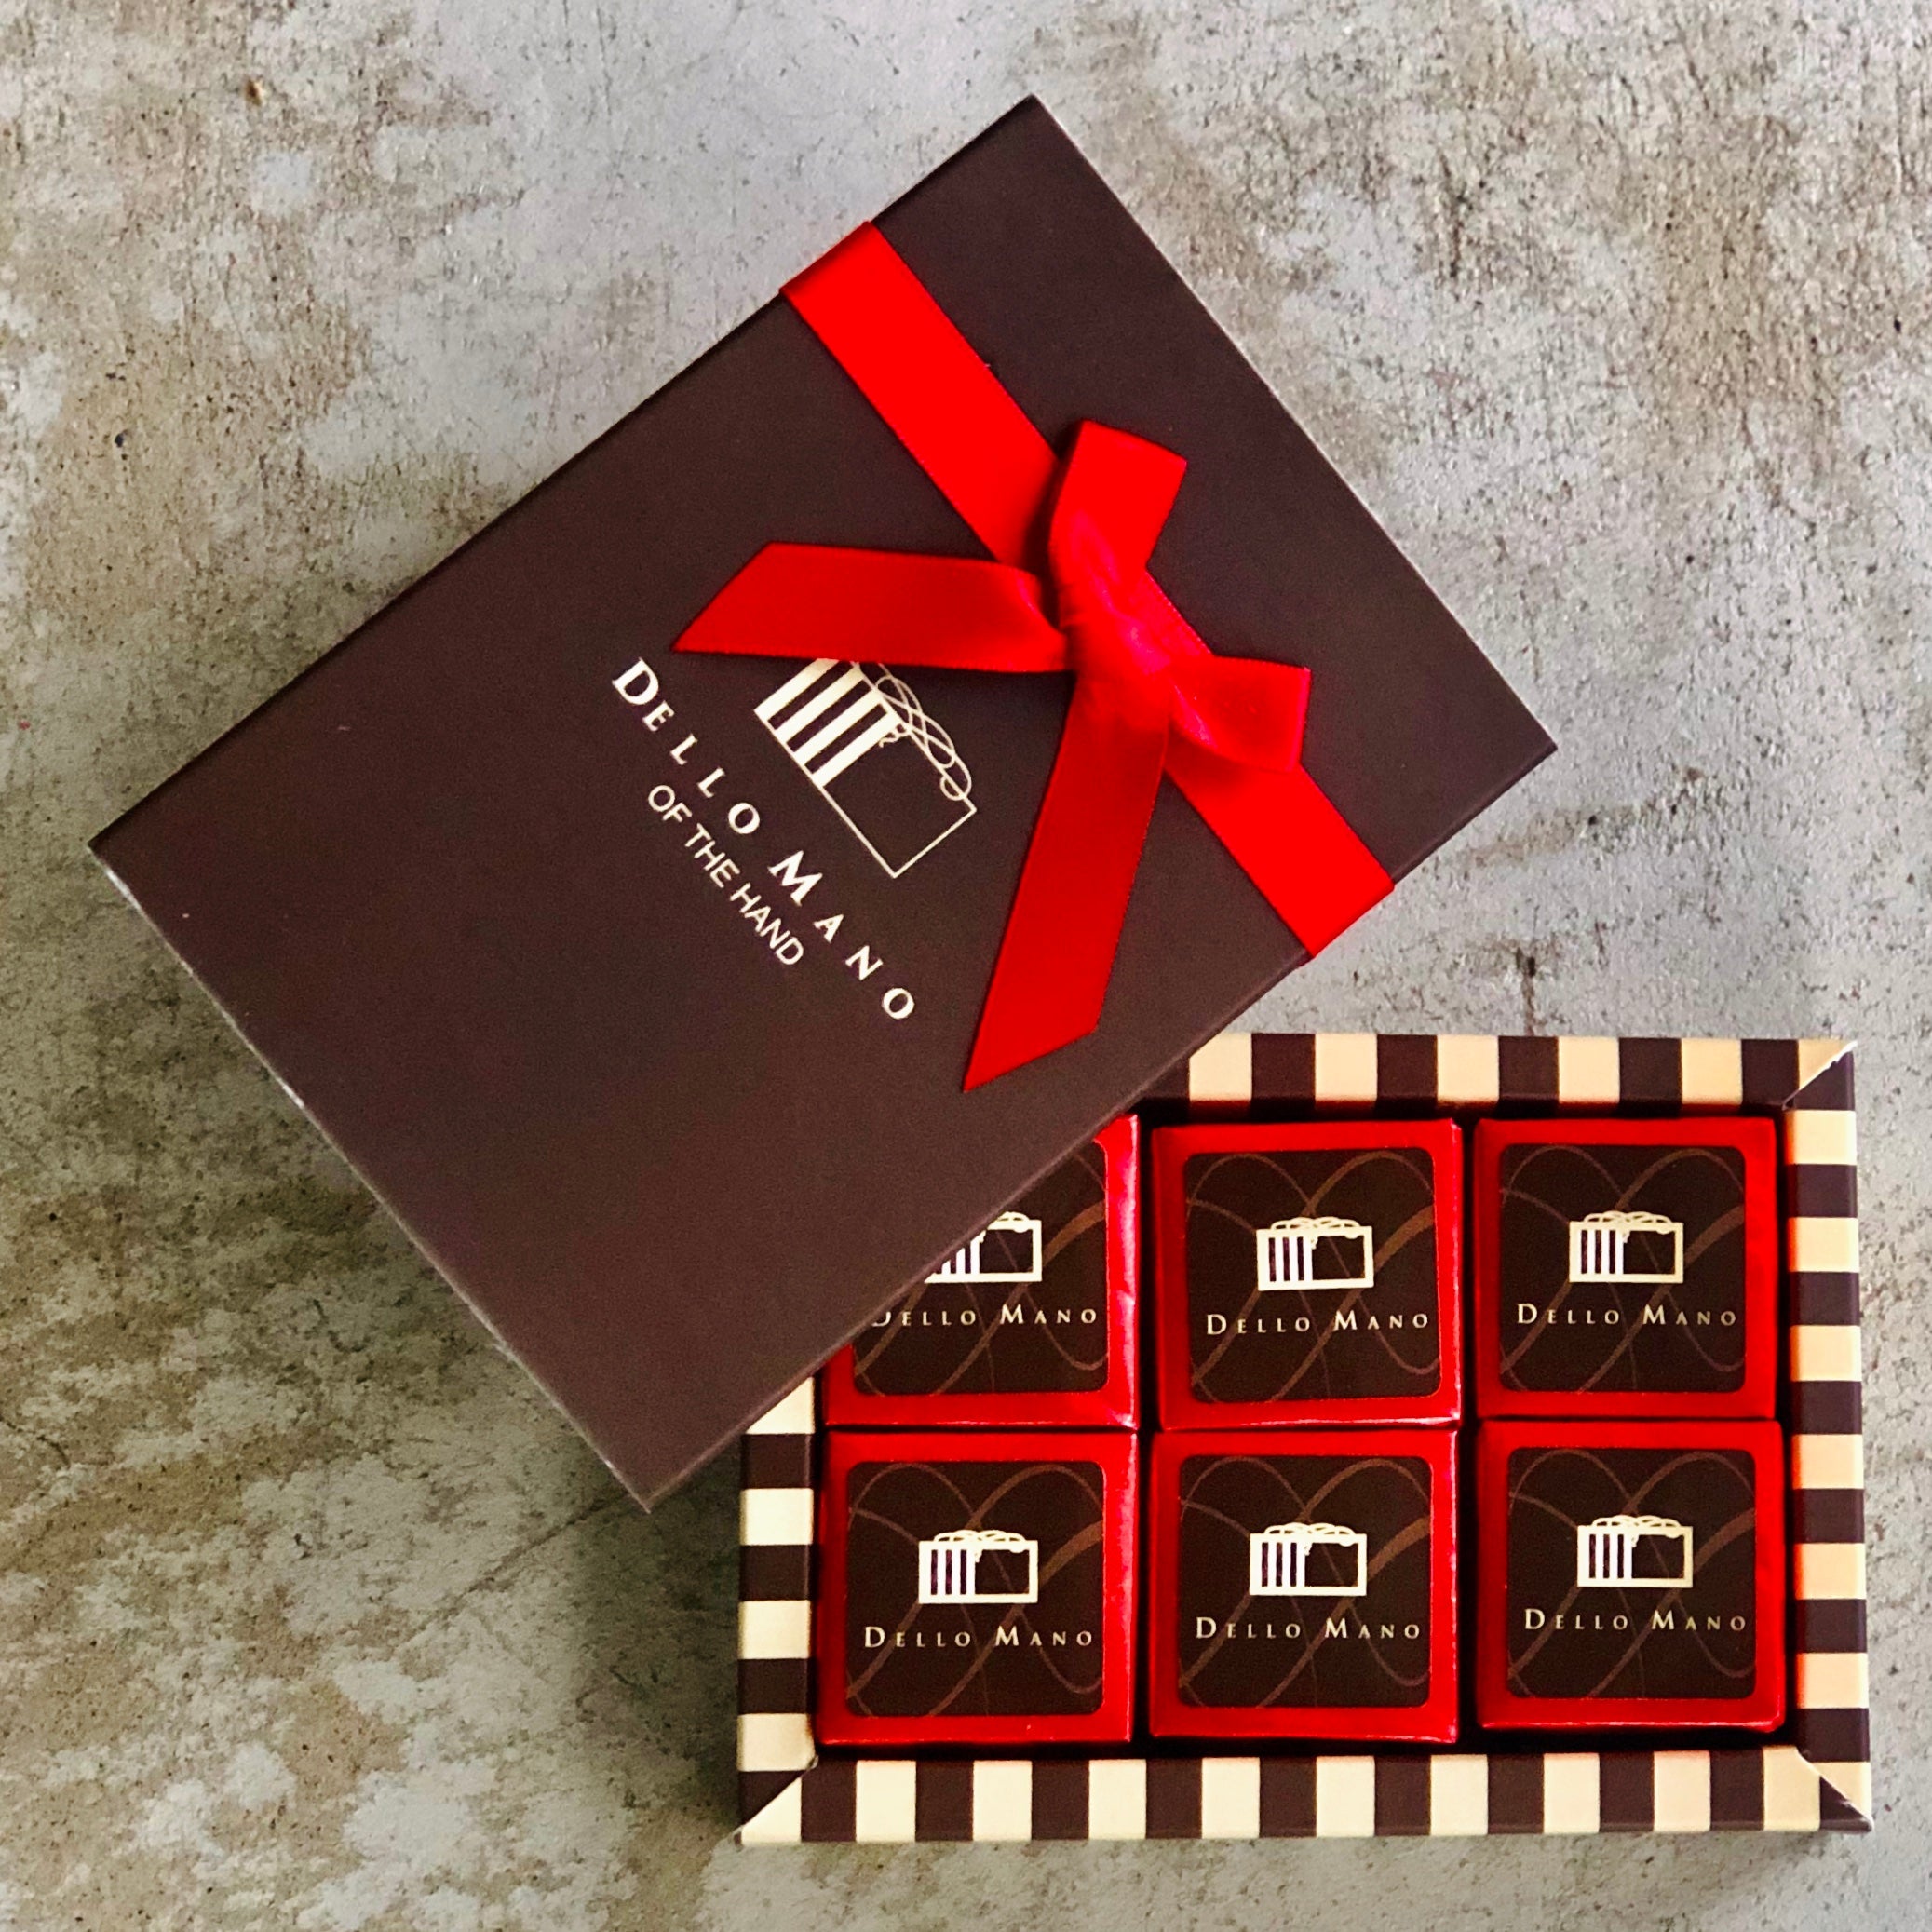 A small gift box of gluten free brownies. Each brownie is individually foiled with a brown label that says Dello Mano